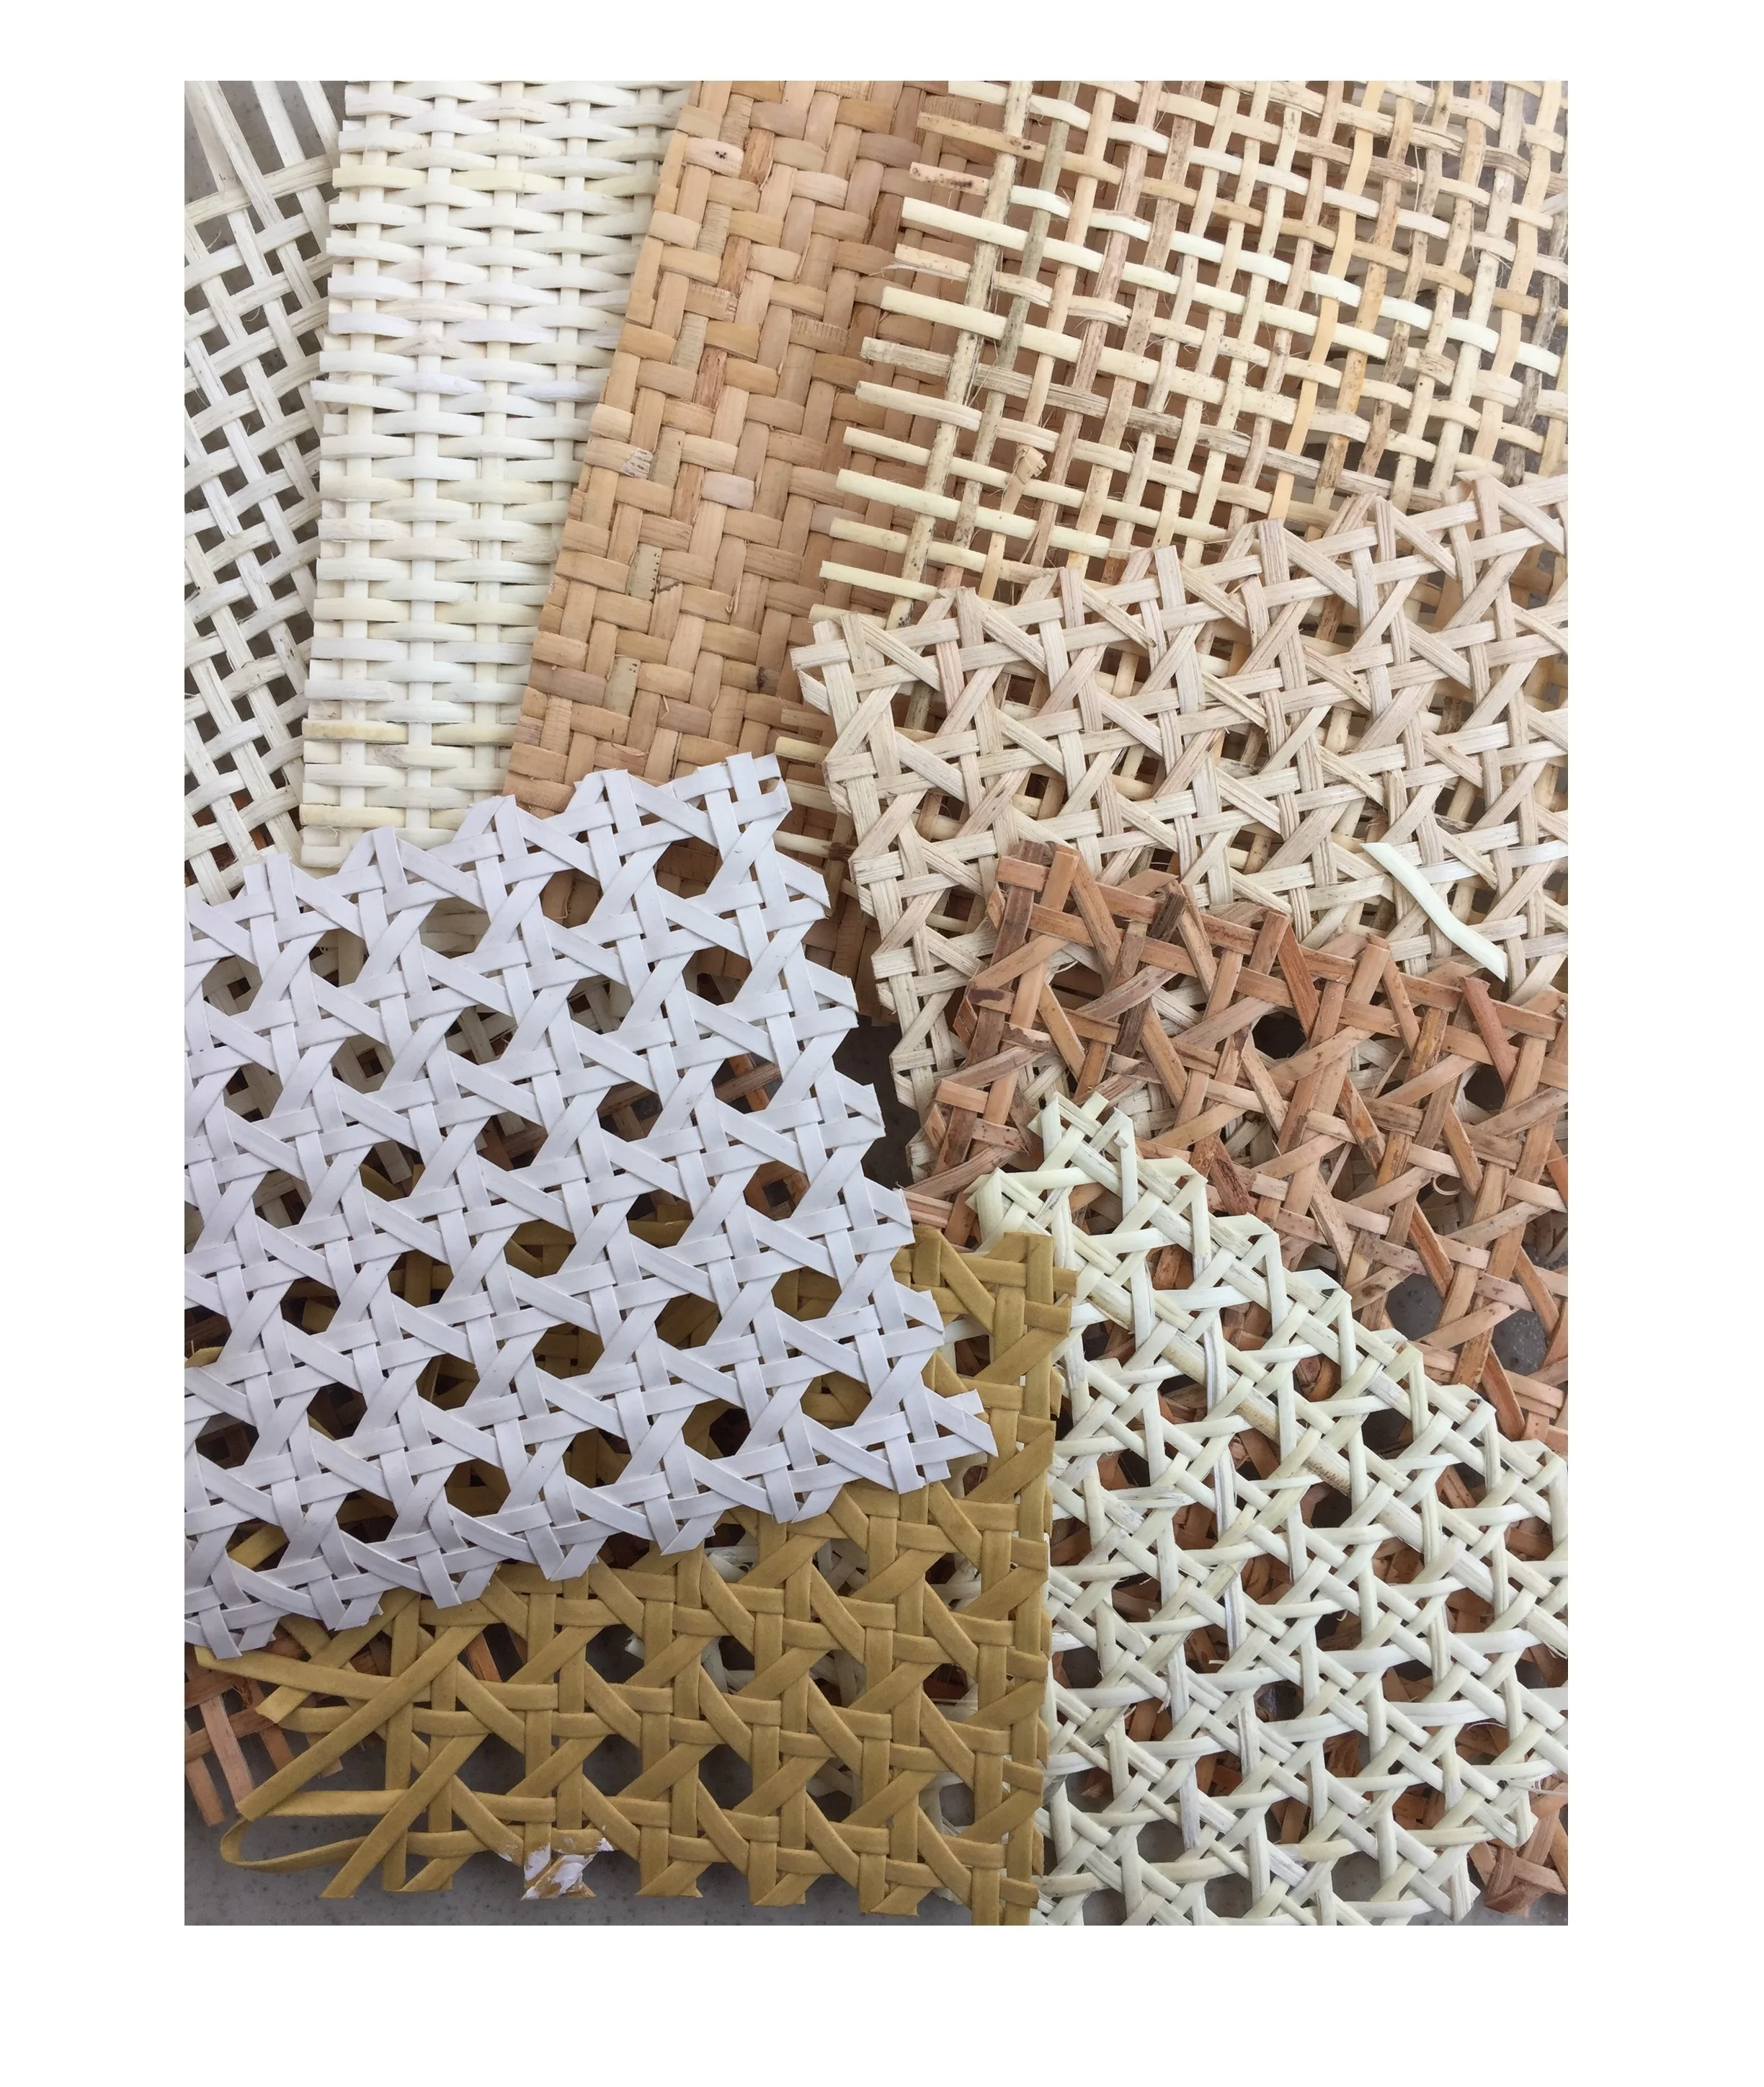 
Wholesale Natural Wicker Rattan Cane Webbing Raw Material Cane Rattan Webbing Roll 